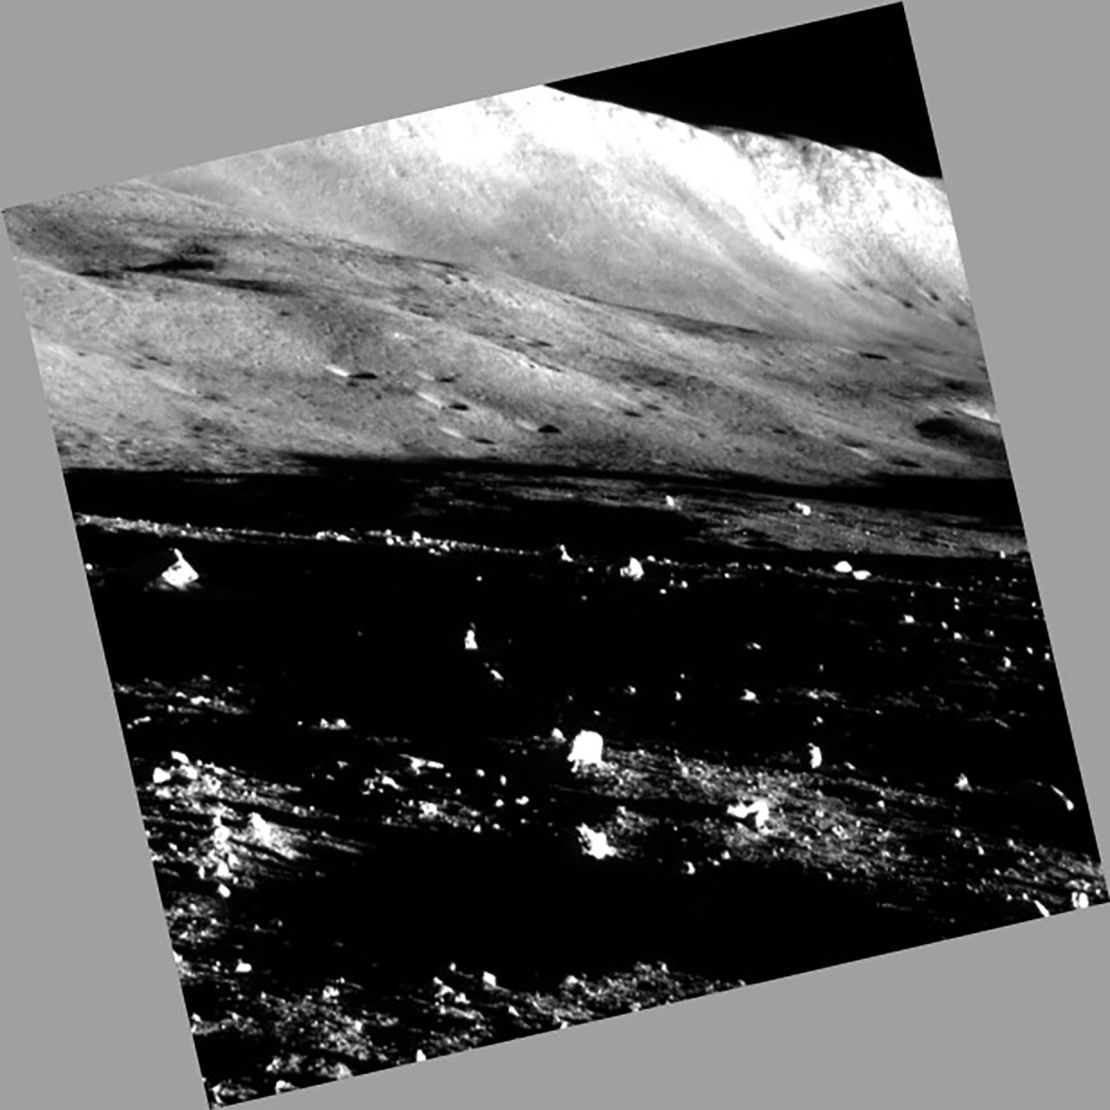 This moody scene was the last image taken by the SLIM lander before entering lunar night in late January.